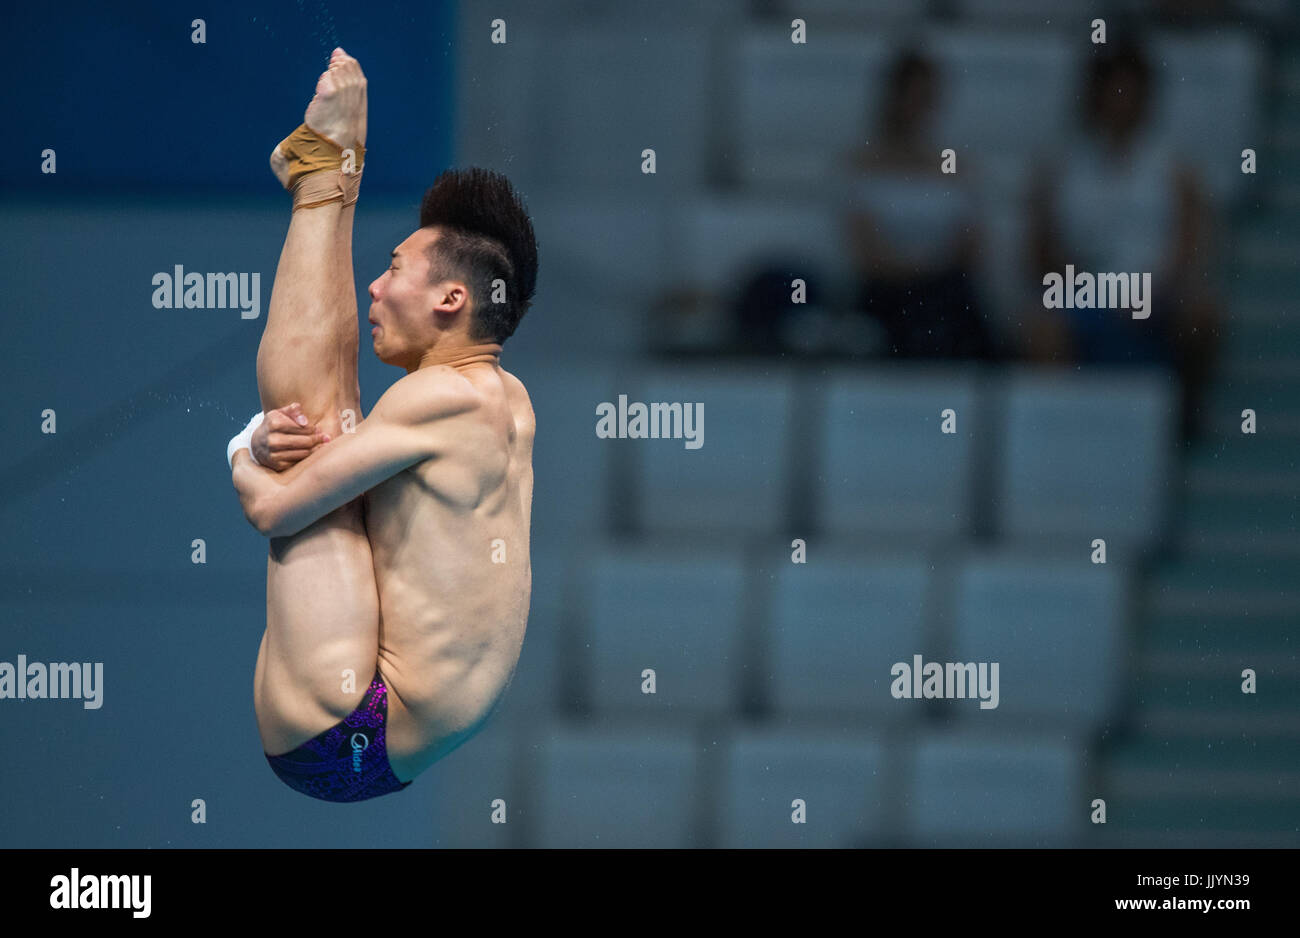 Budapest, Hungary. 21st July, 2017. dpatop - Aisen Chen from China in action during the men's 10m diving qualification round at the FINA World Championships 2017 in Budapest, Hungary, 21 July 2017. Photo: Jens Büttner/dpa-Zentralbild/dpa/Alamy Live News Stock Photo